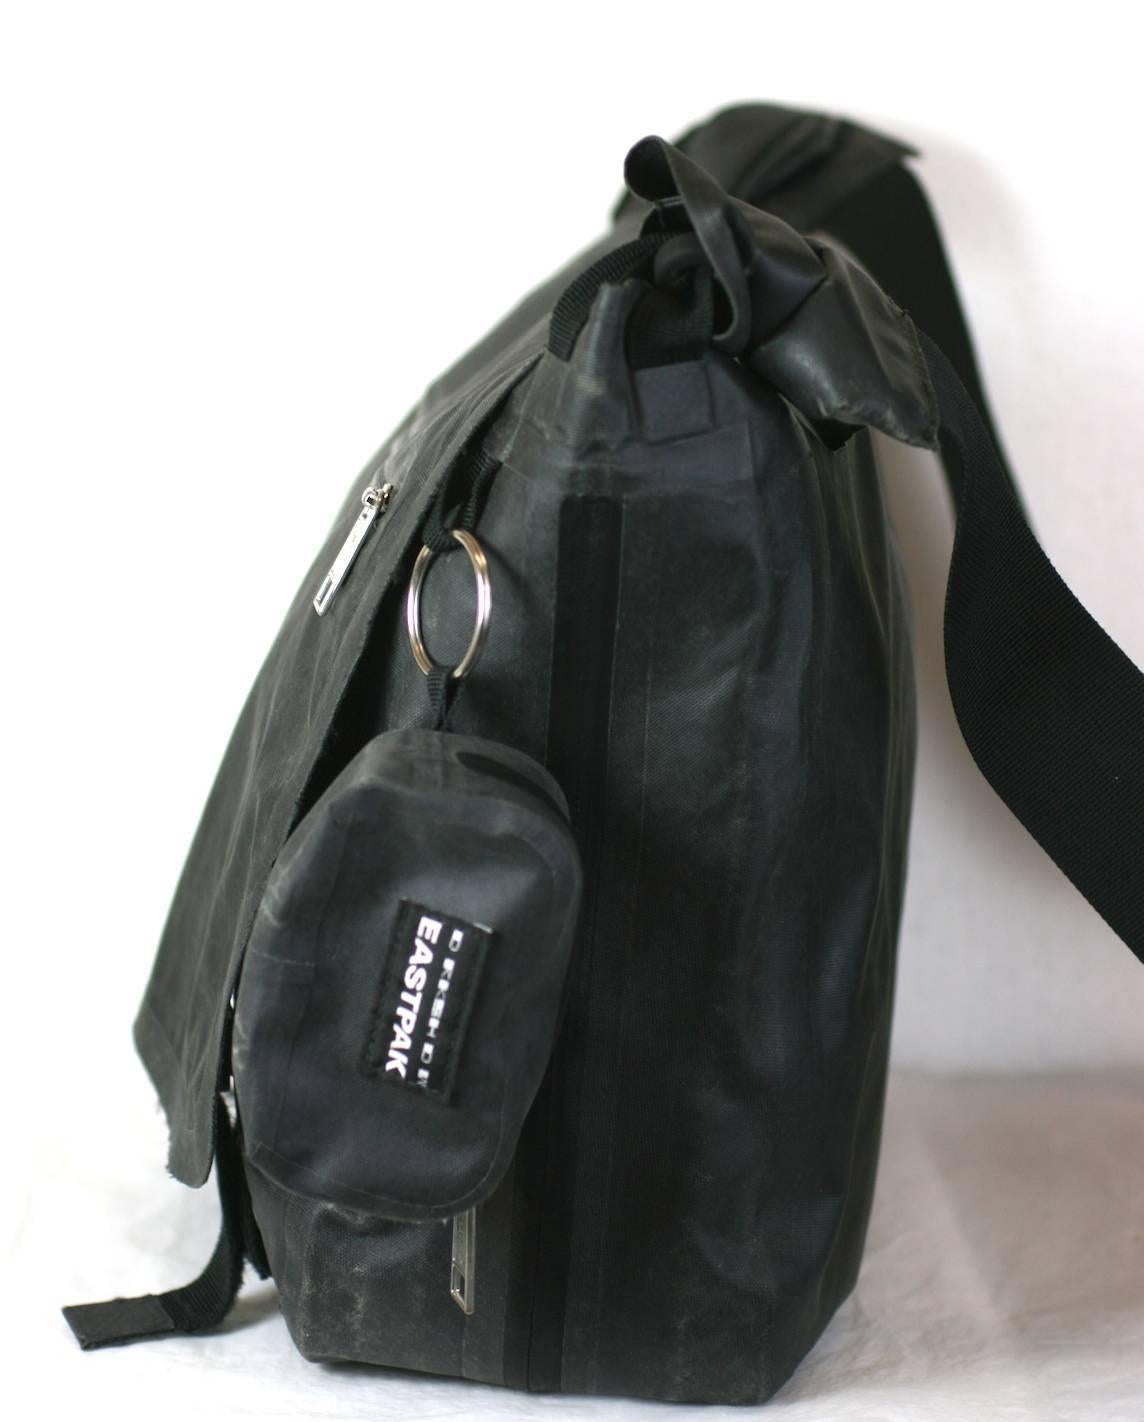  Rick Owens Resinated canvas Messenger bag, by Eastpak x DkShdw. 
Large scale messenger bag with expandable zipper on base. Flap fastens with 2 velcros straps for security. Open storage slot in back, with dangling key purse on side. Interior also